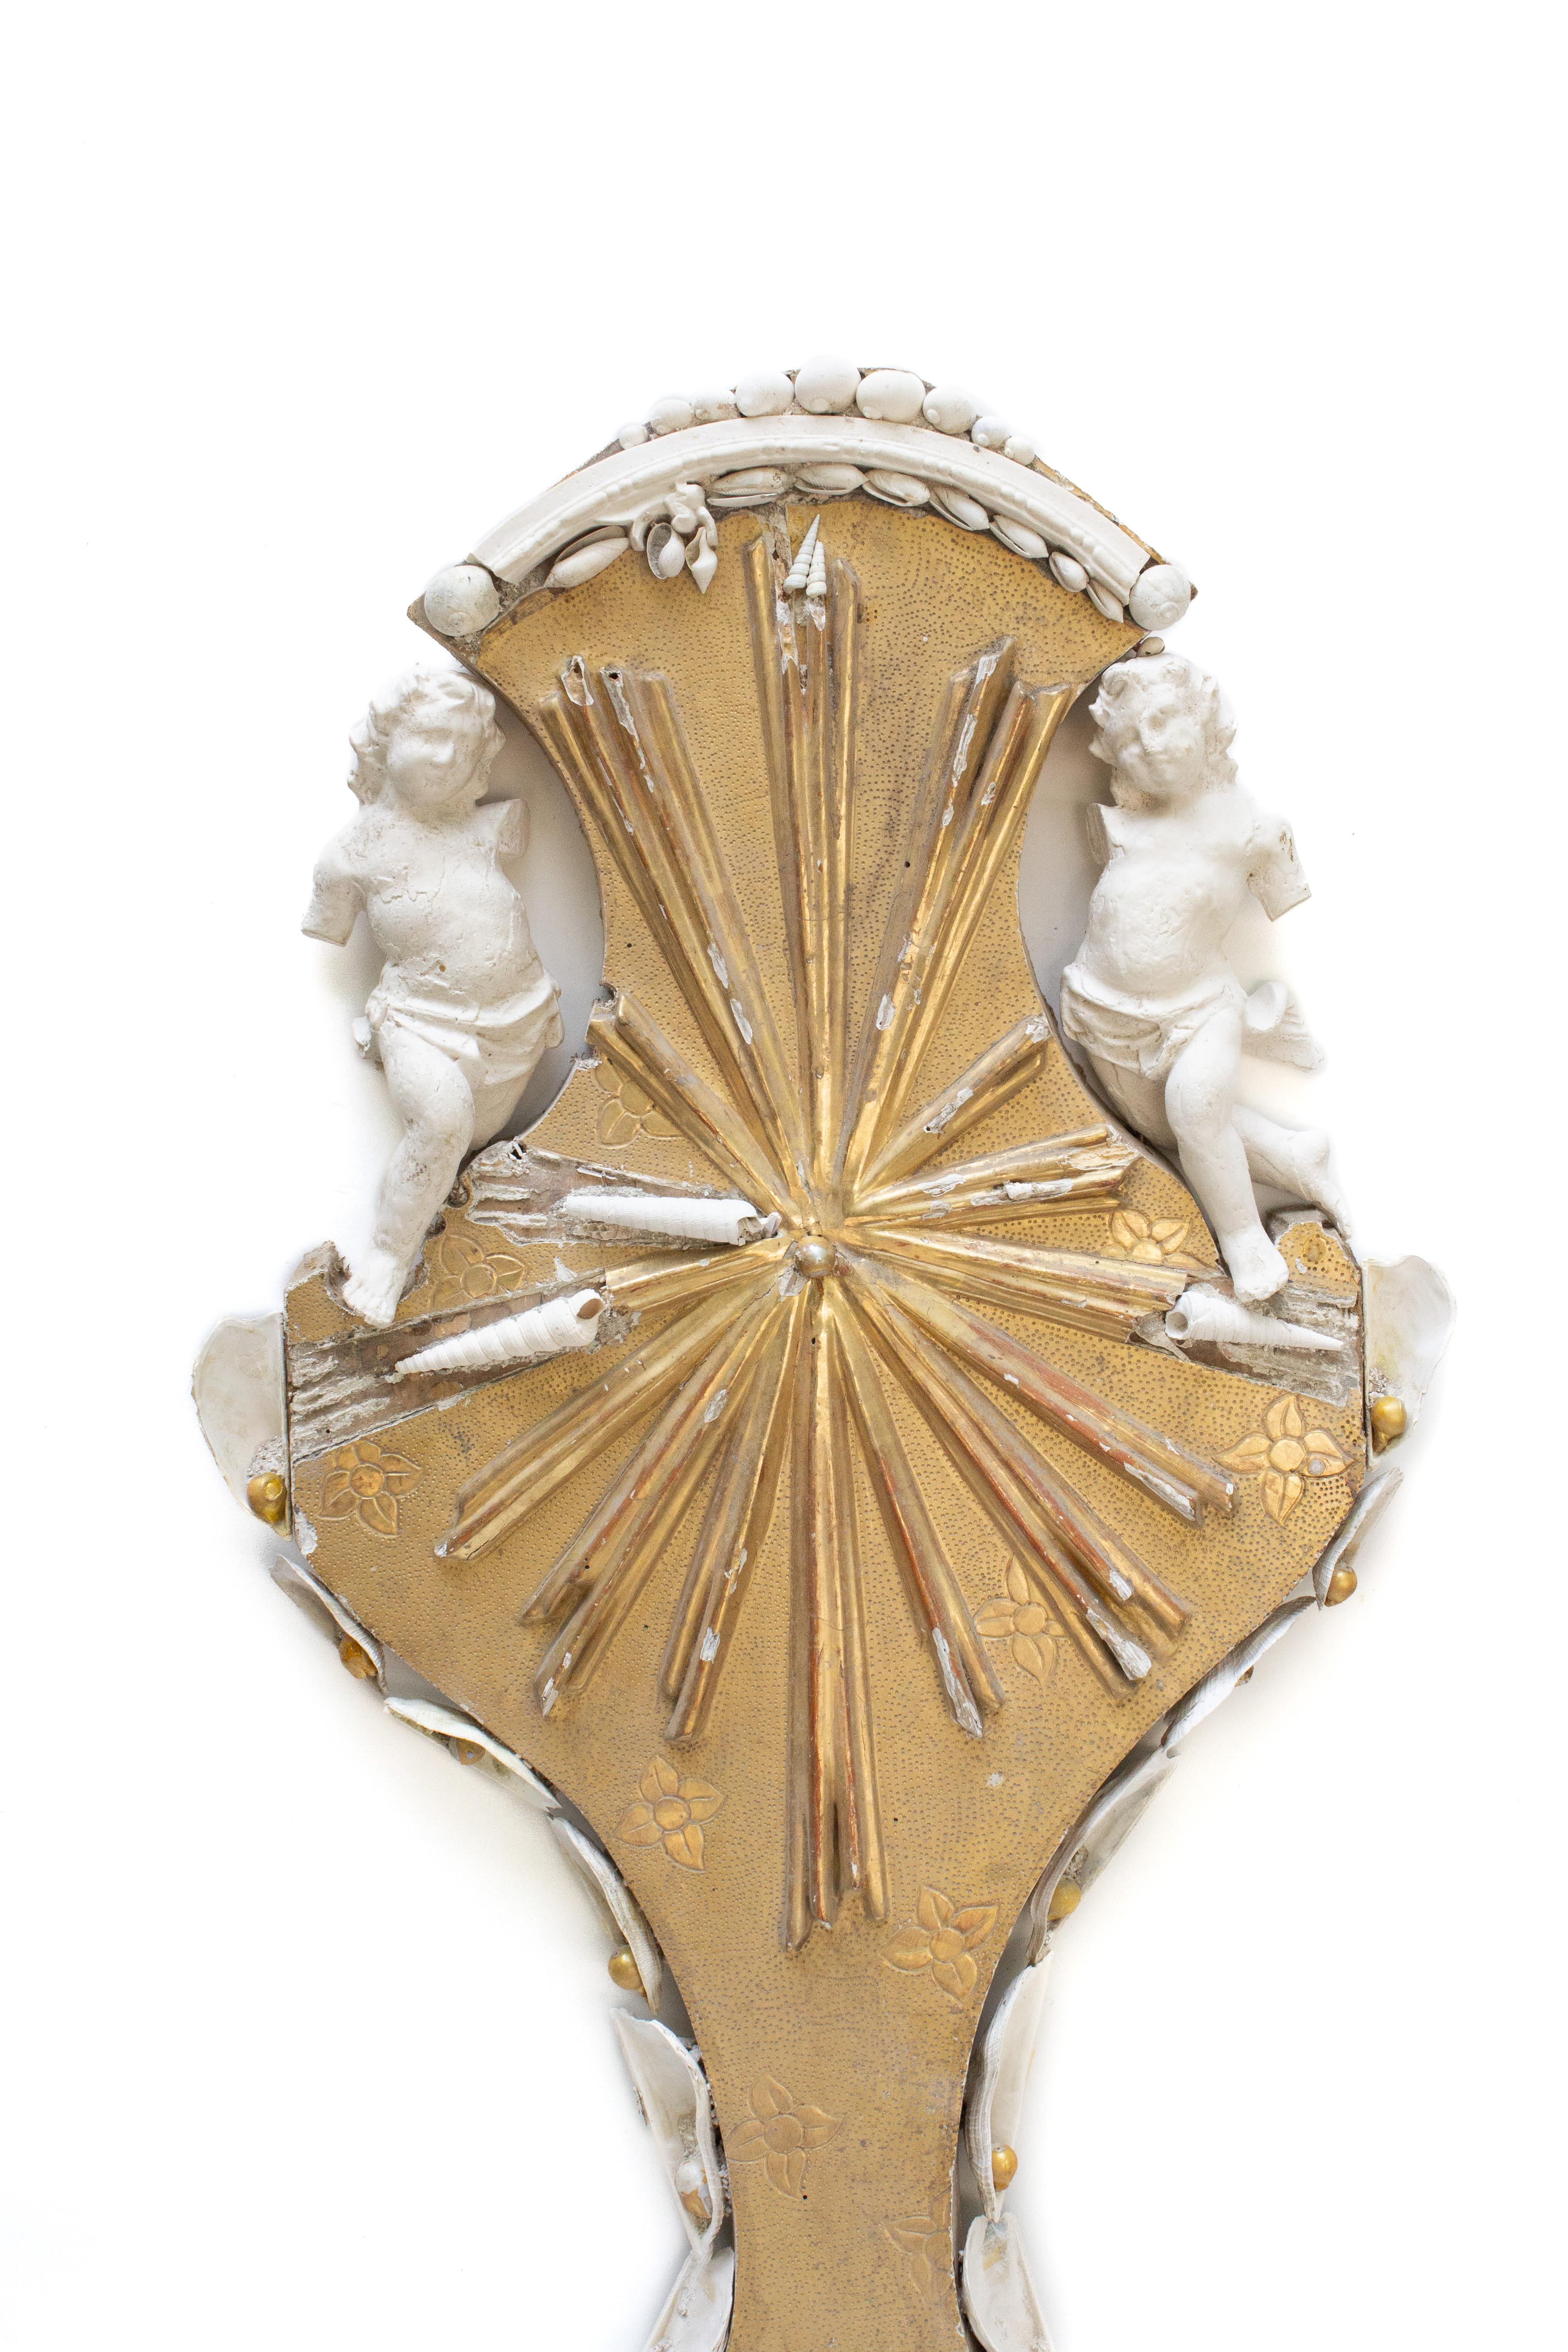 Rococo 18th Century Italian Architectural Element with Hand-Cast Plaster Angels For Sale